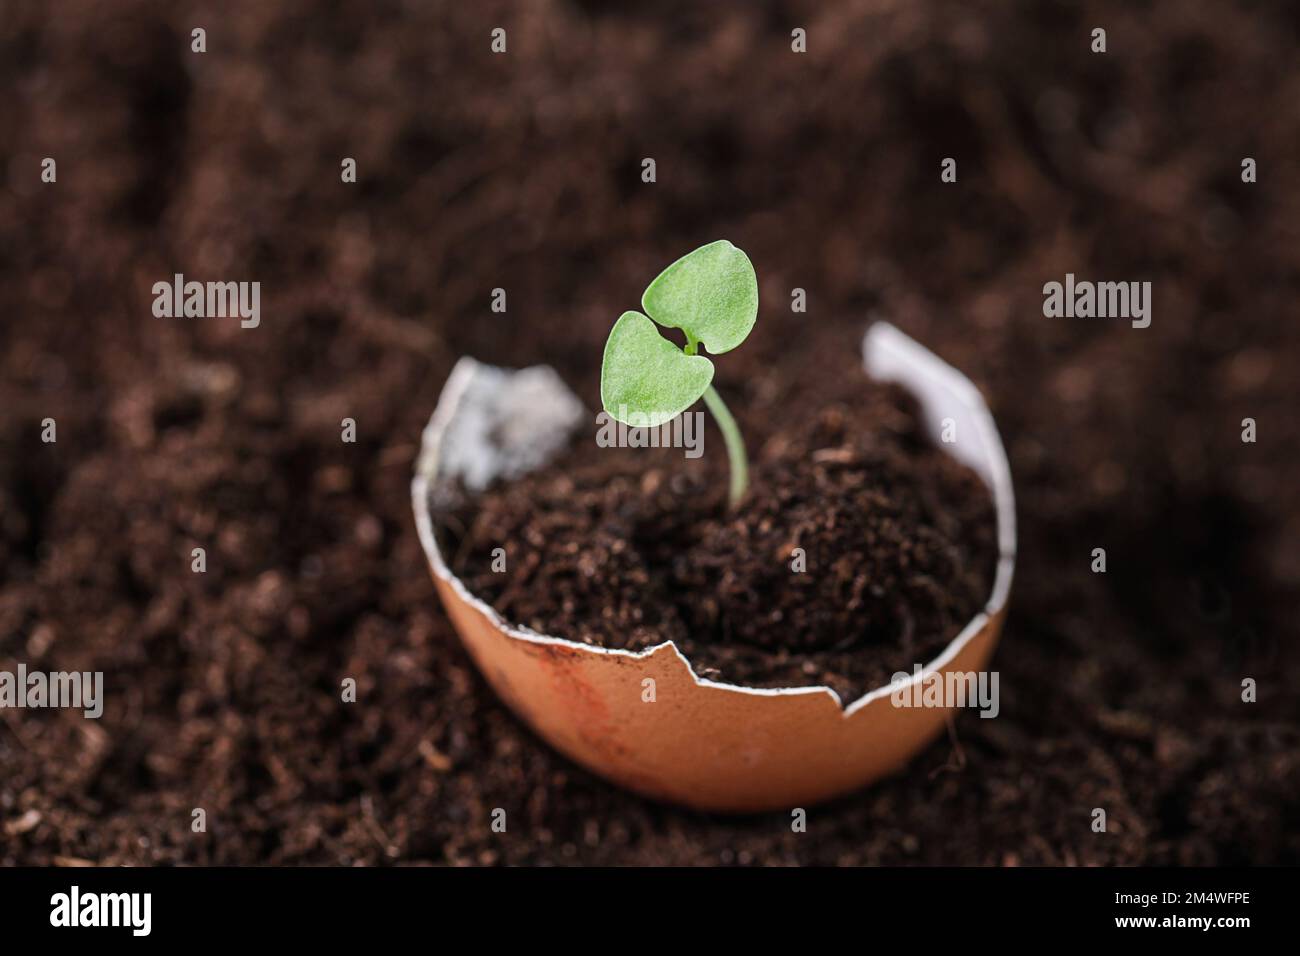 Growing plants. Young plants growing in egg shell on ground background. Home gardening Natural Fertilizer. Gardening concept Stock Photo